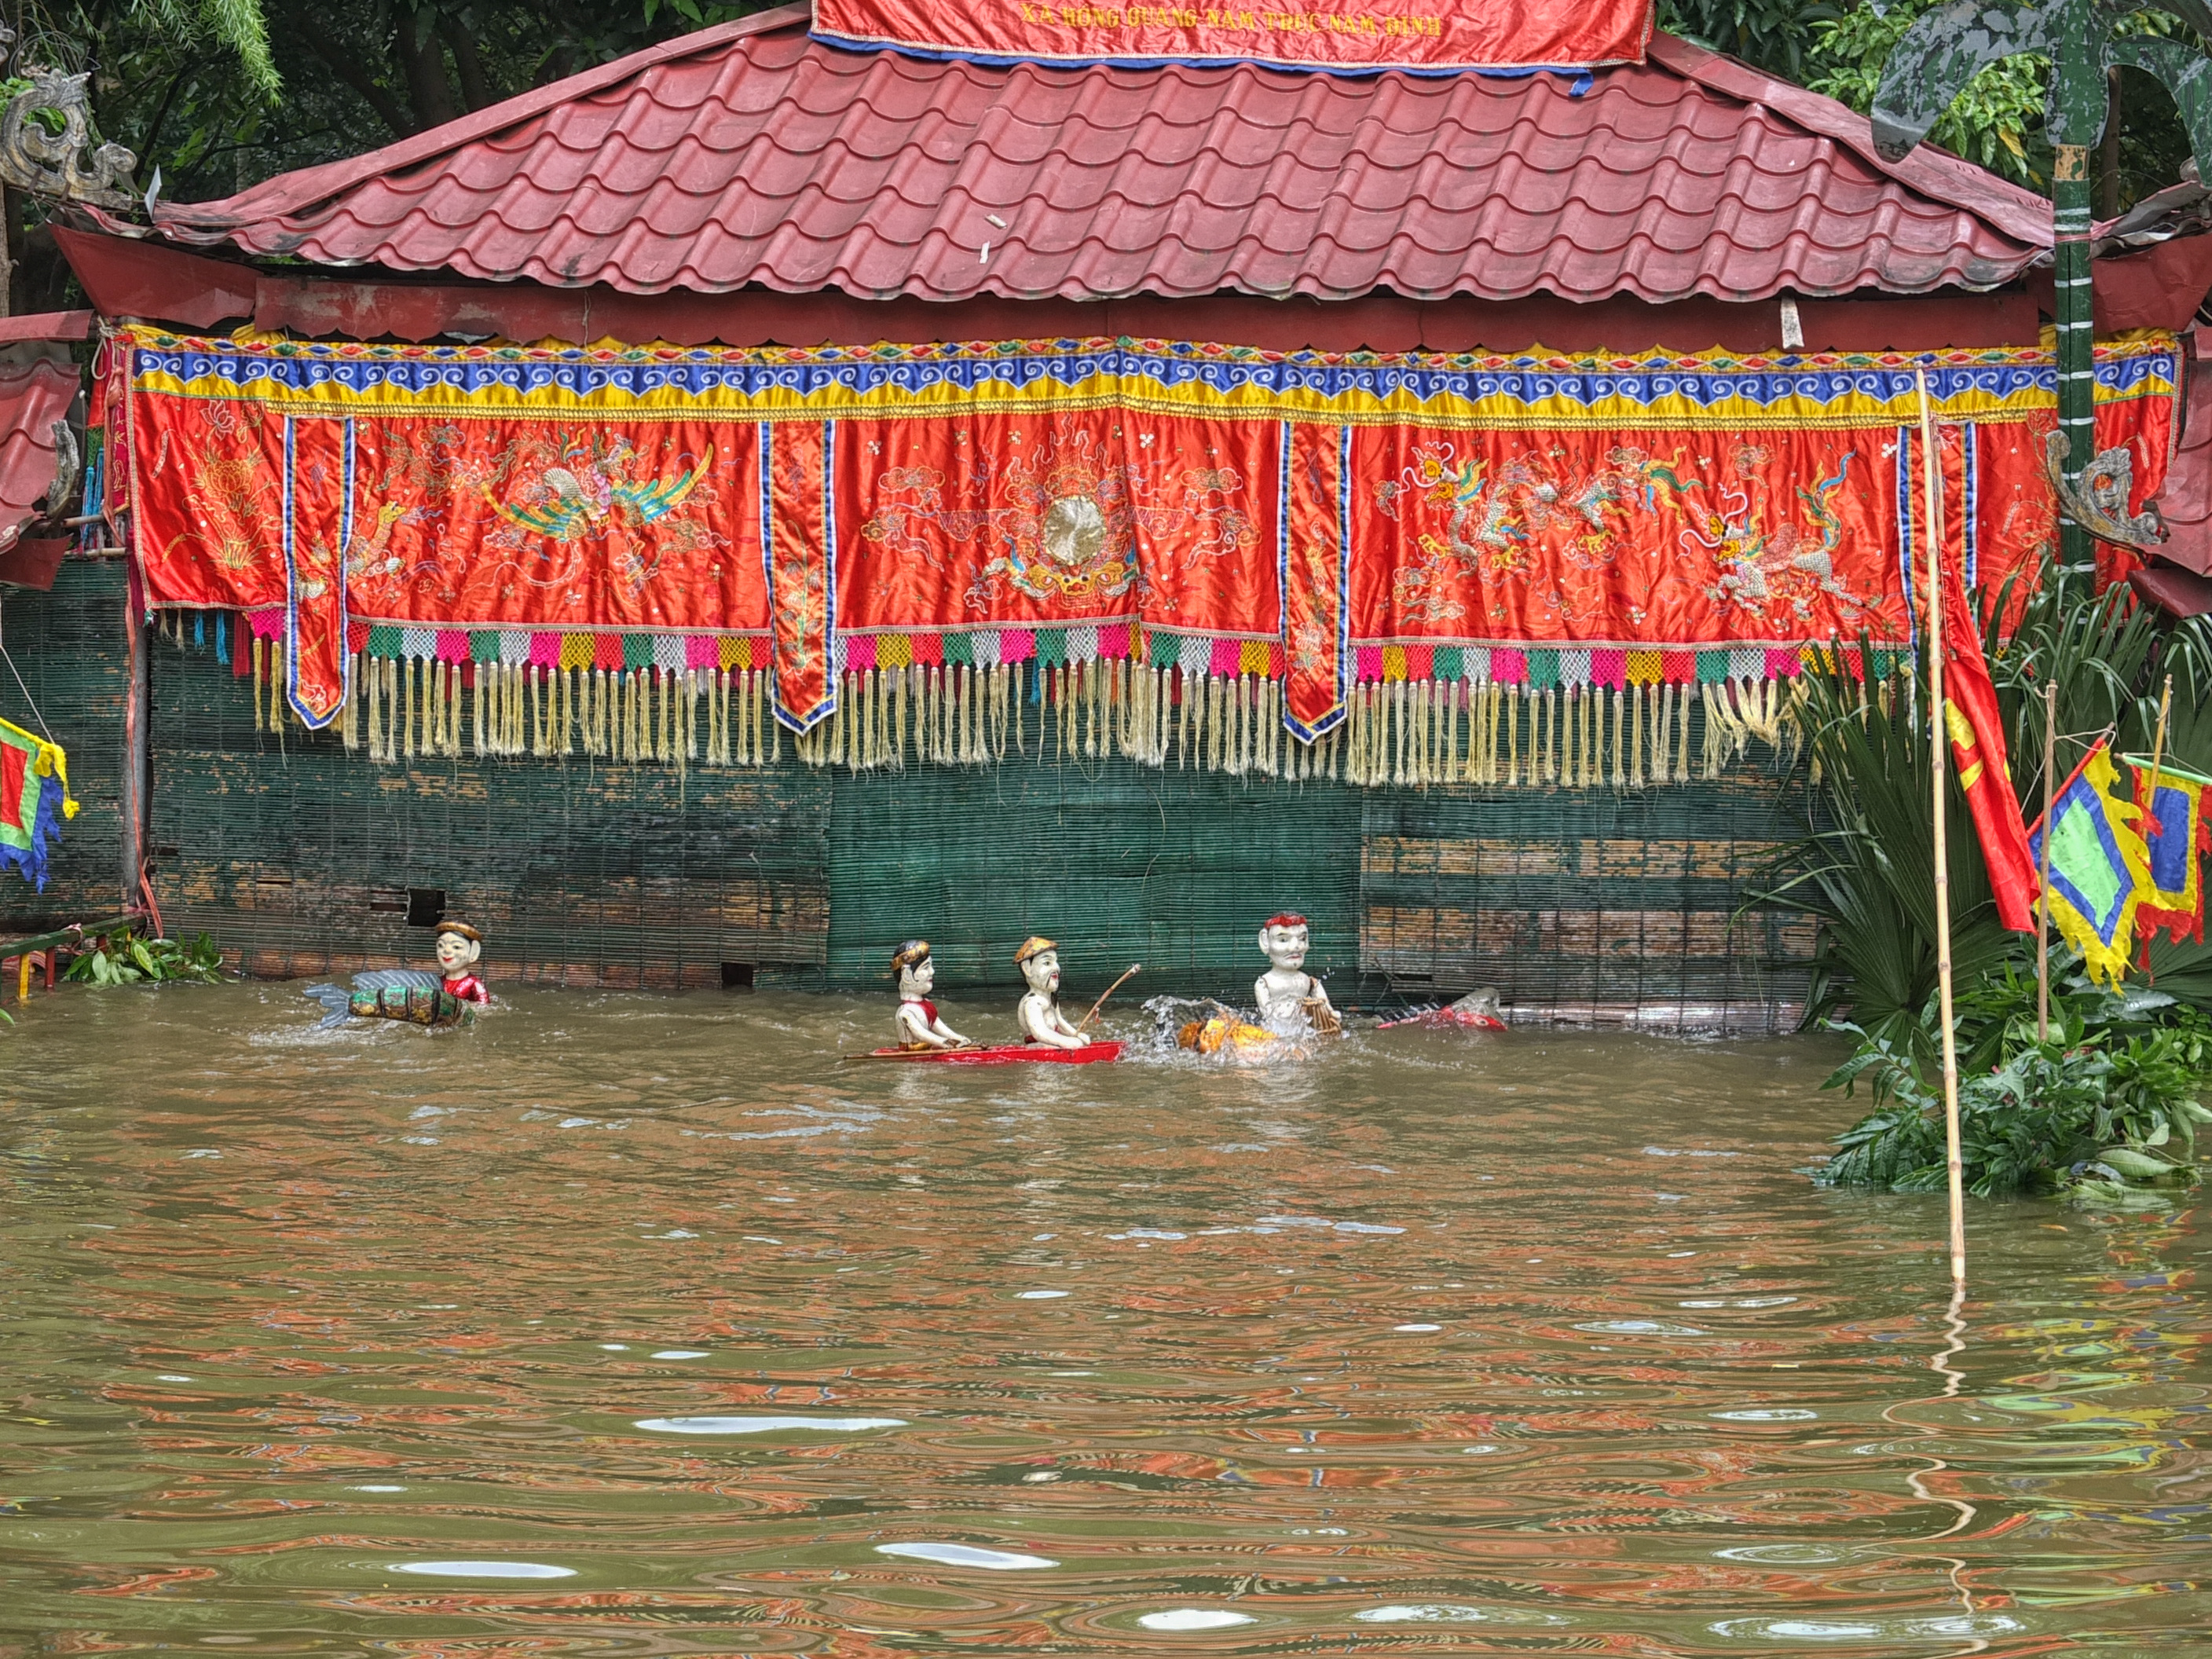 a group of statues in a flooded area